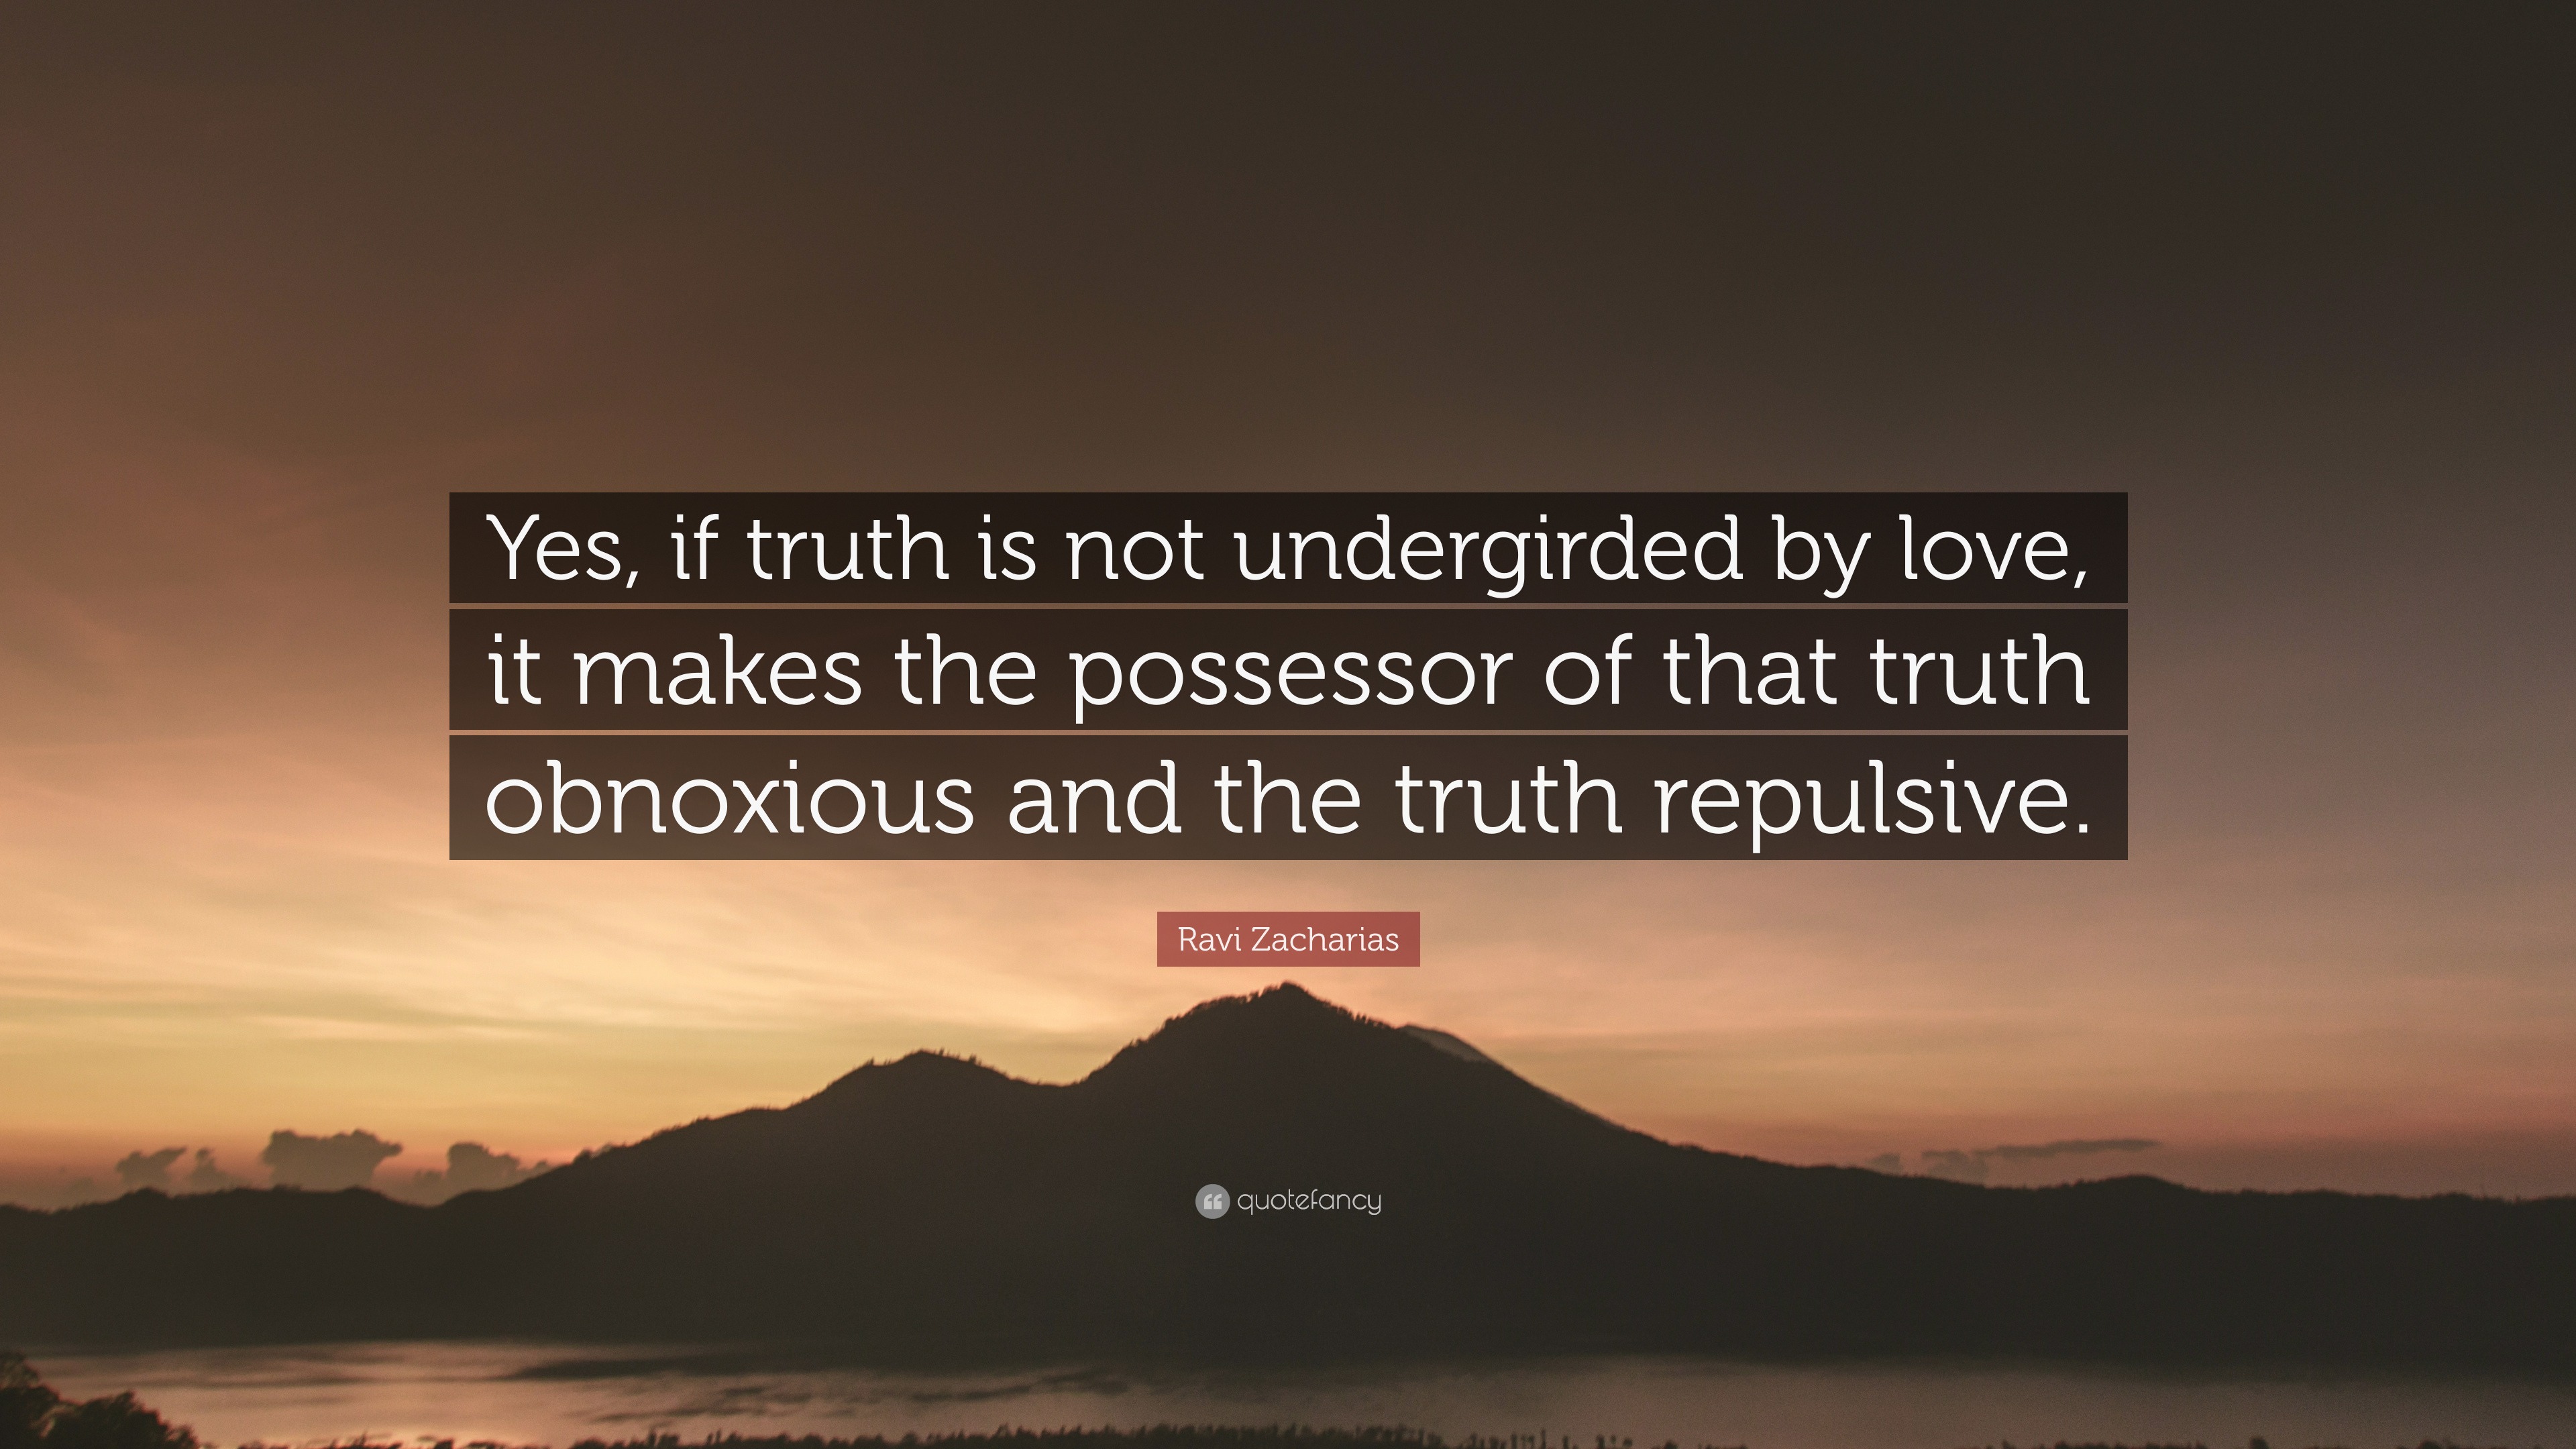 “Yes, if truth is not undergirded by love, it makes the possessor of that truth obnoxious and the truth repulsive.”